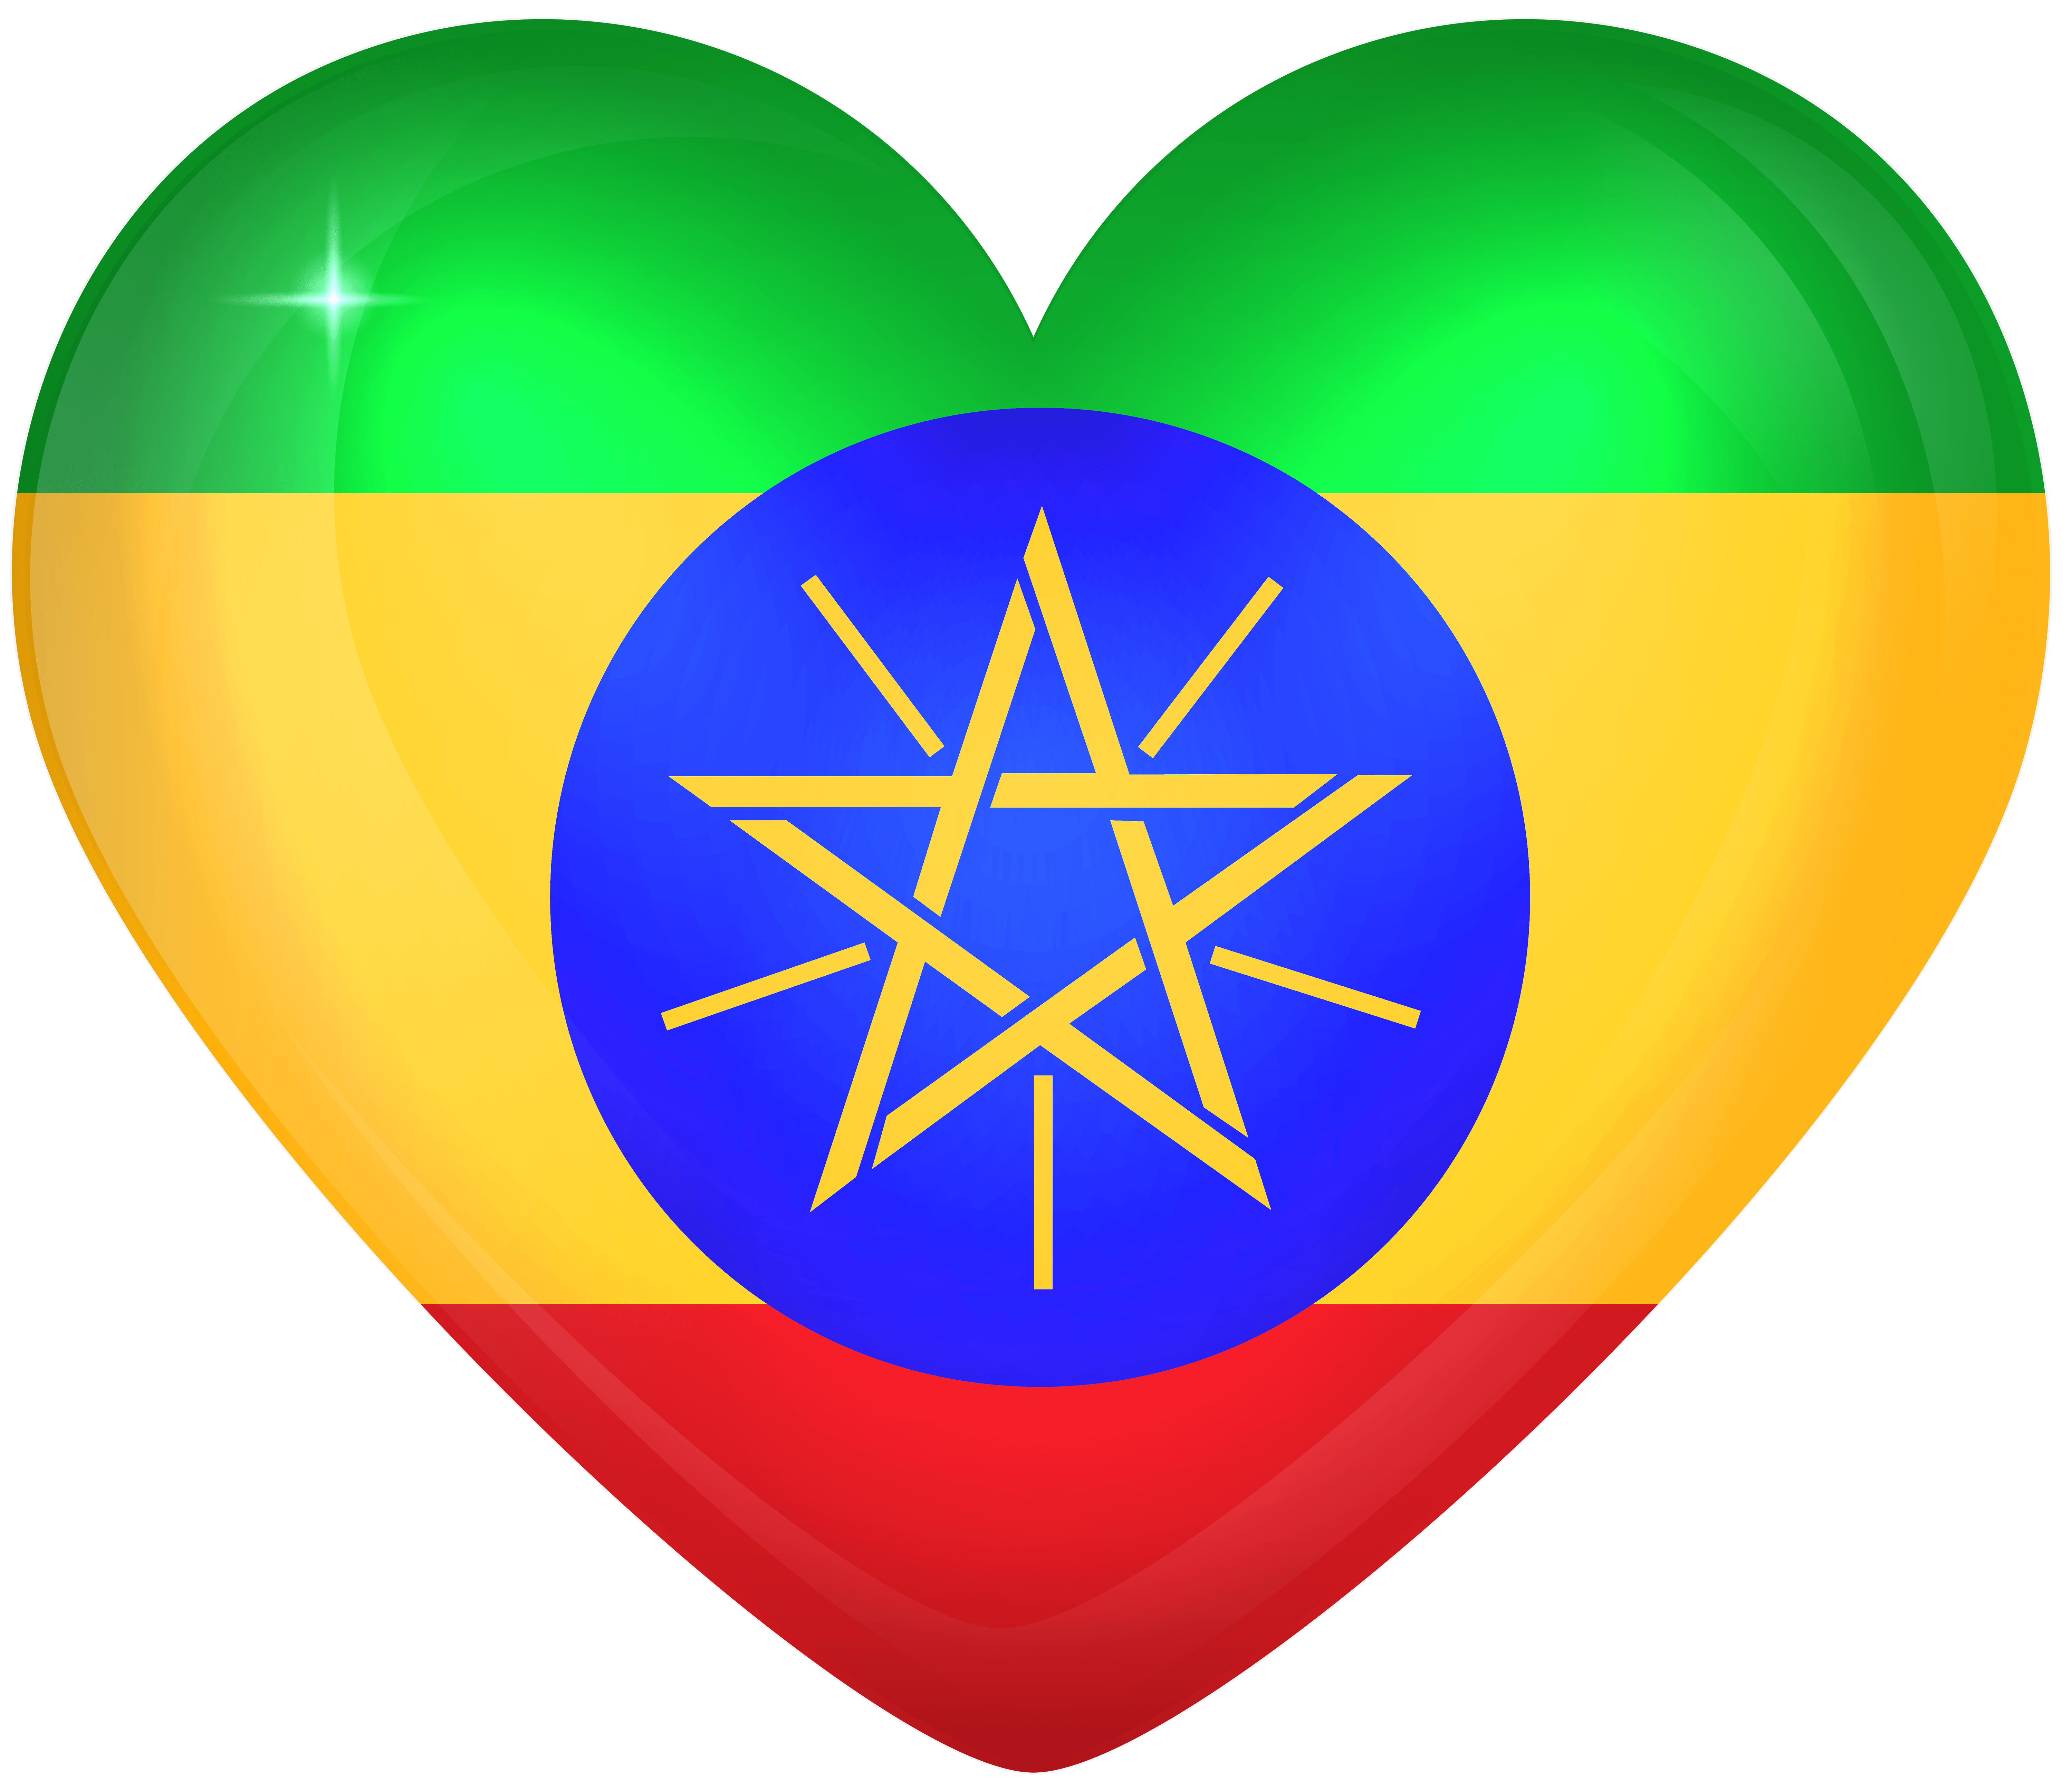 Ethiopia Large Heart Flag Quality Image And Transparent PNG Free Clipart